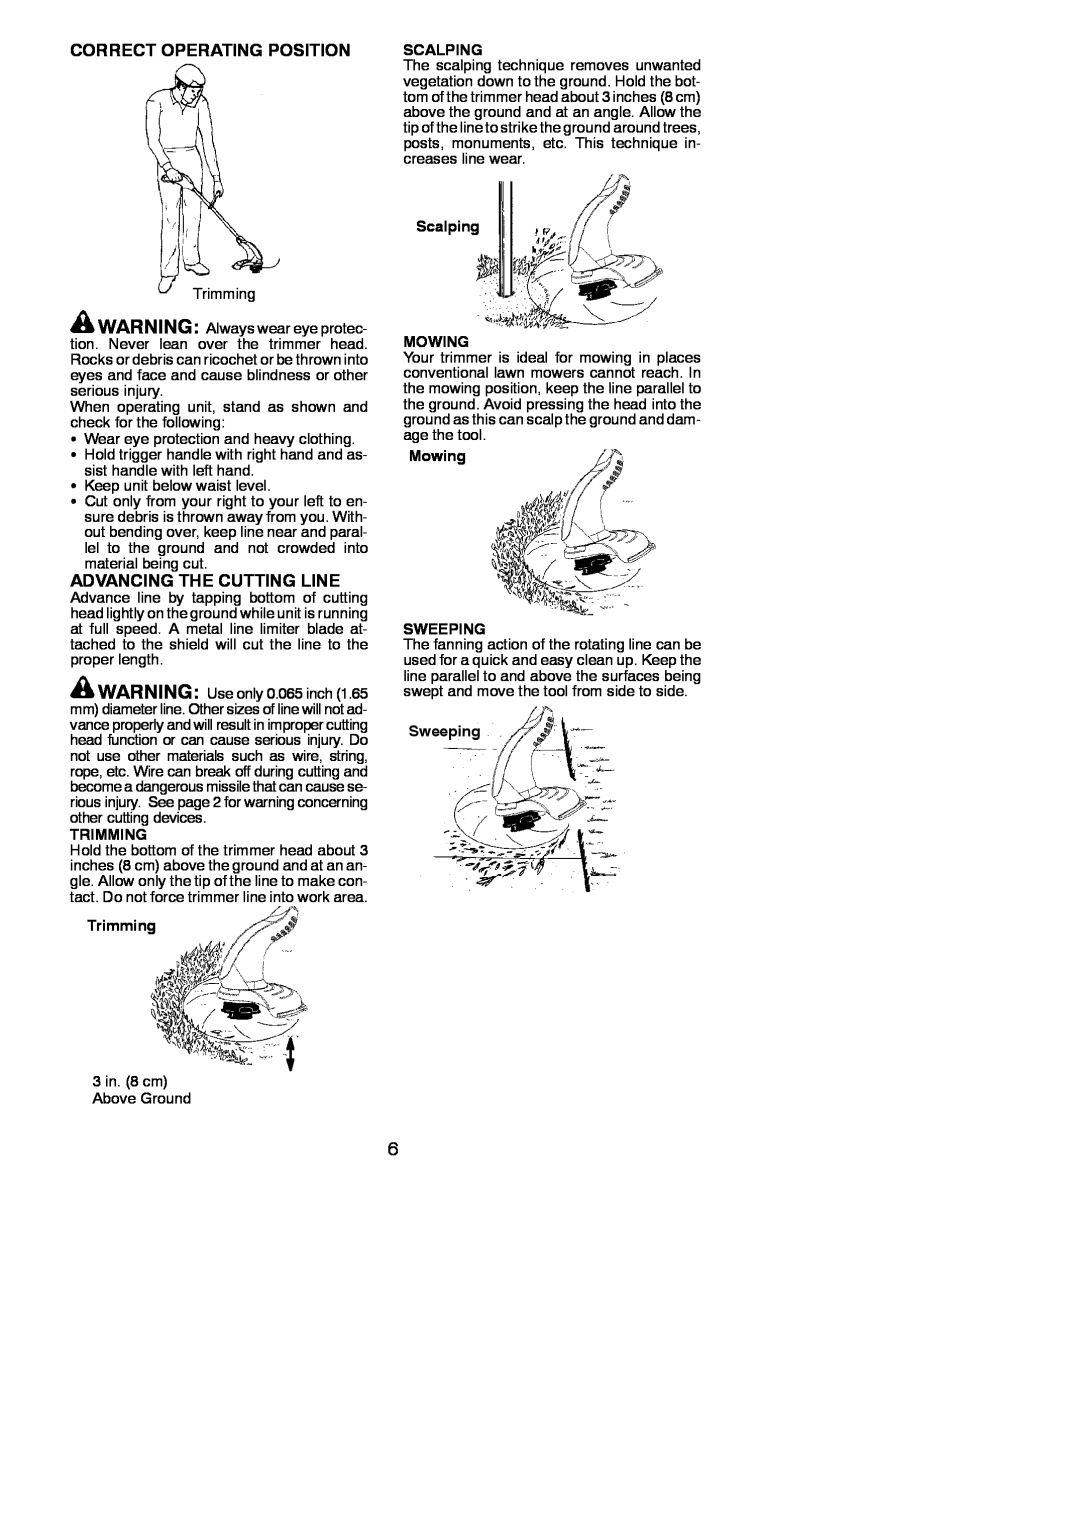 Weed Eater 545117526 instruction manual Trimming, Scalping MOWING, Mowing SWEEPING, Sweeping 